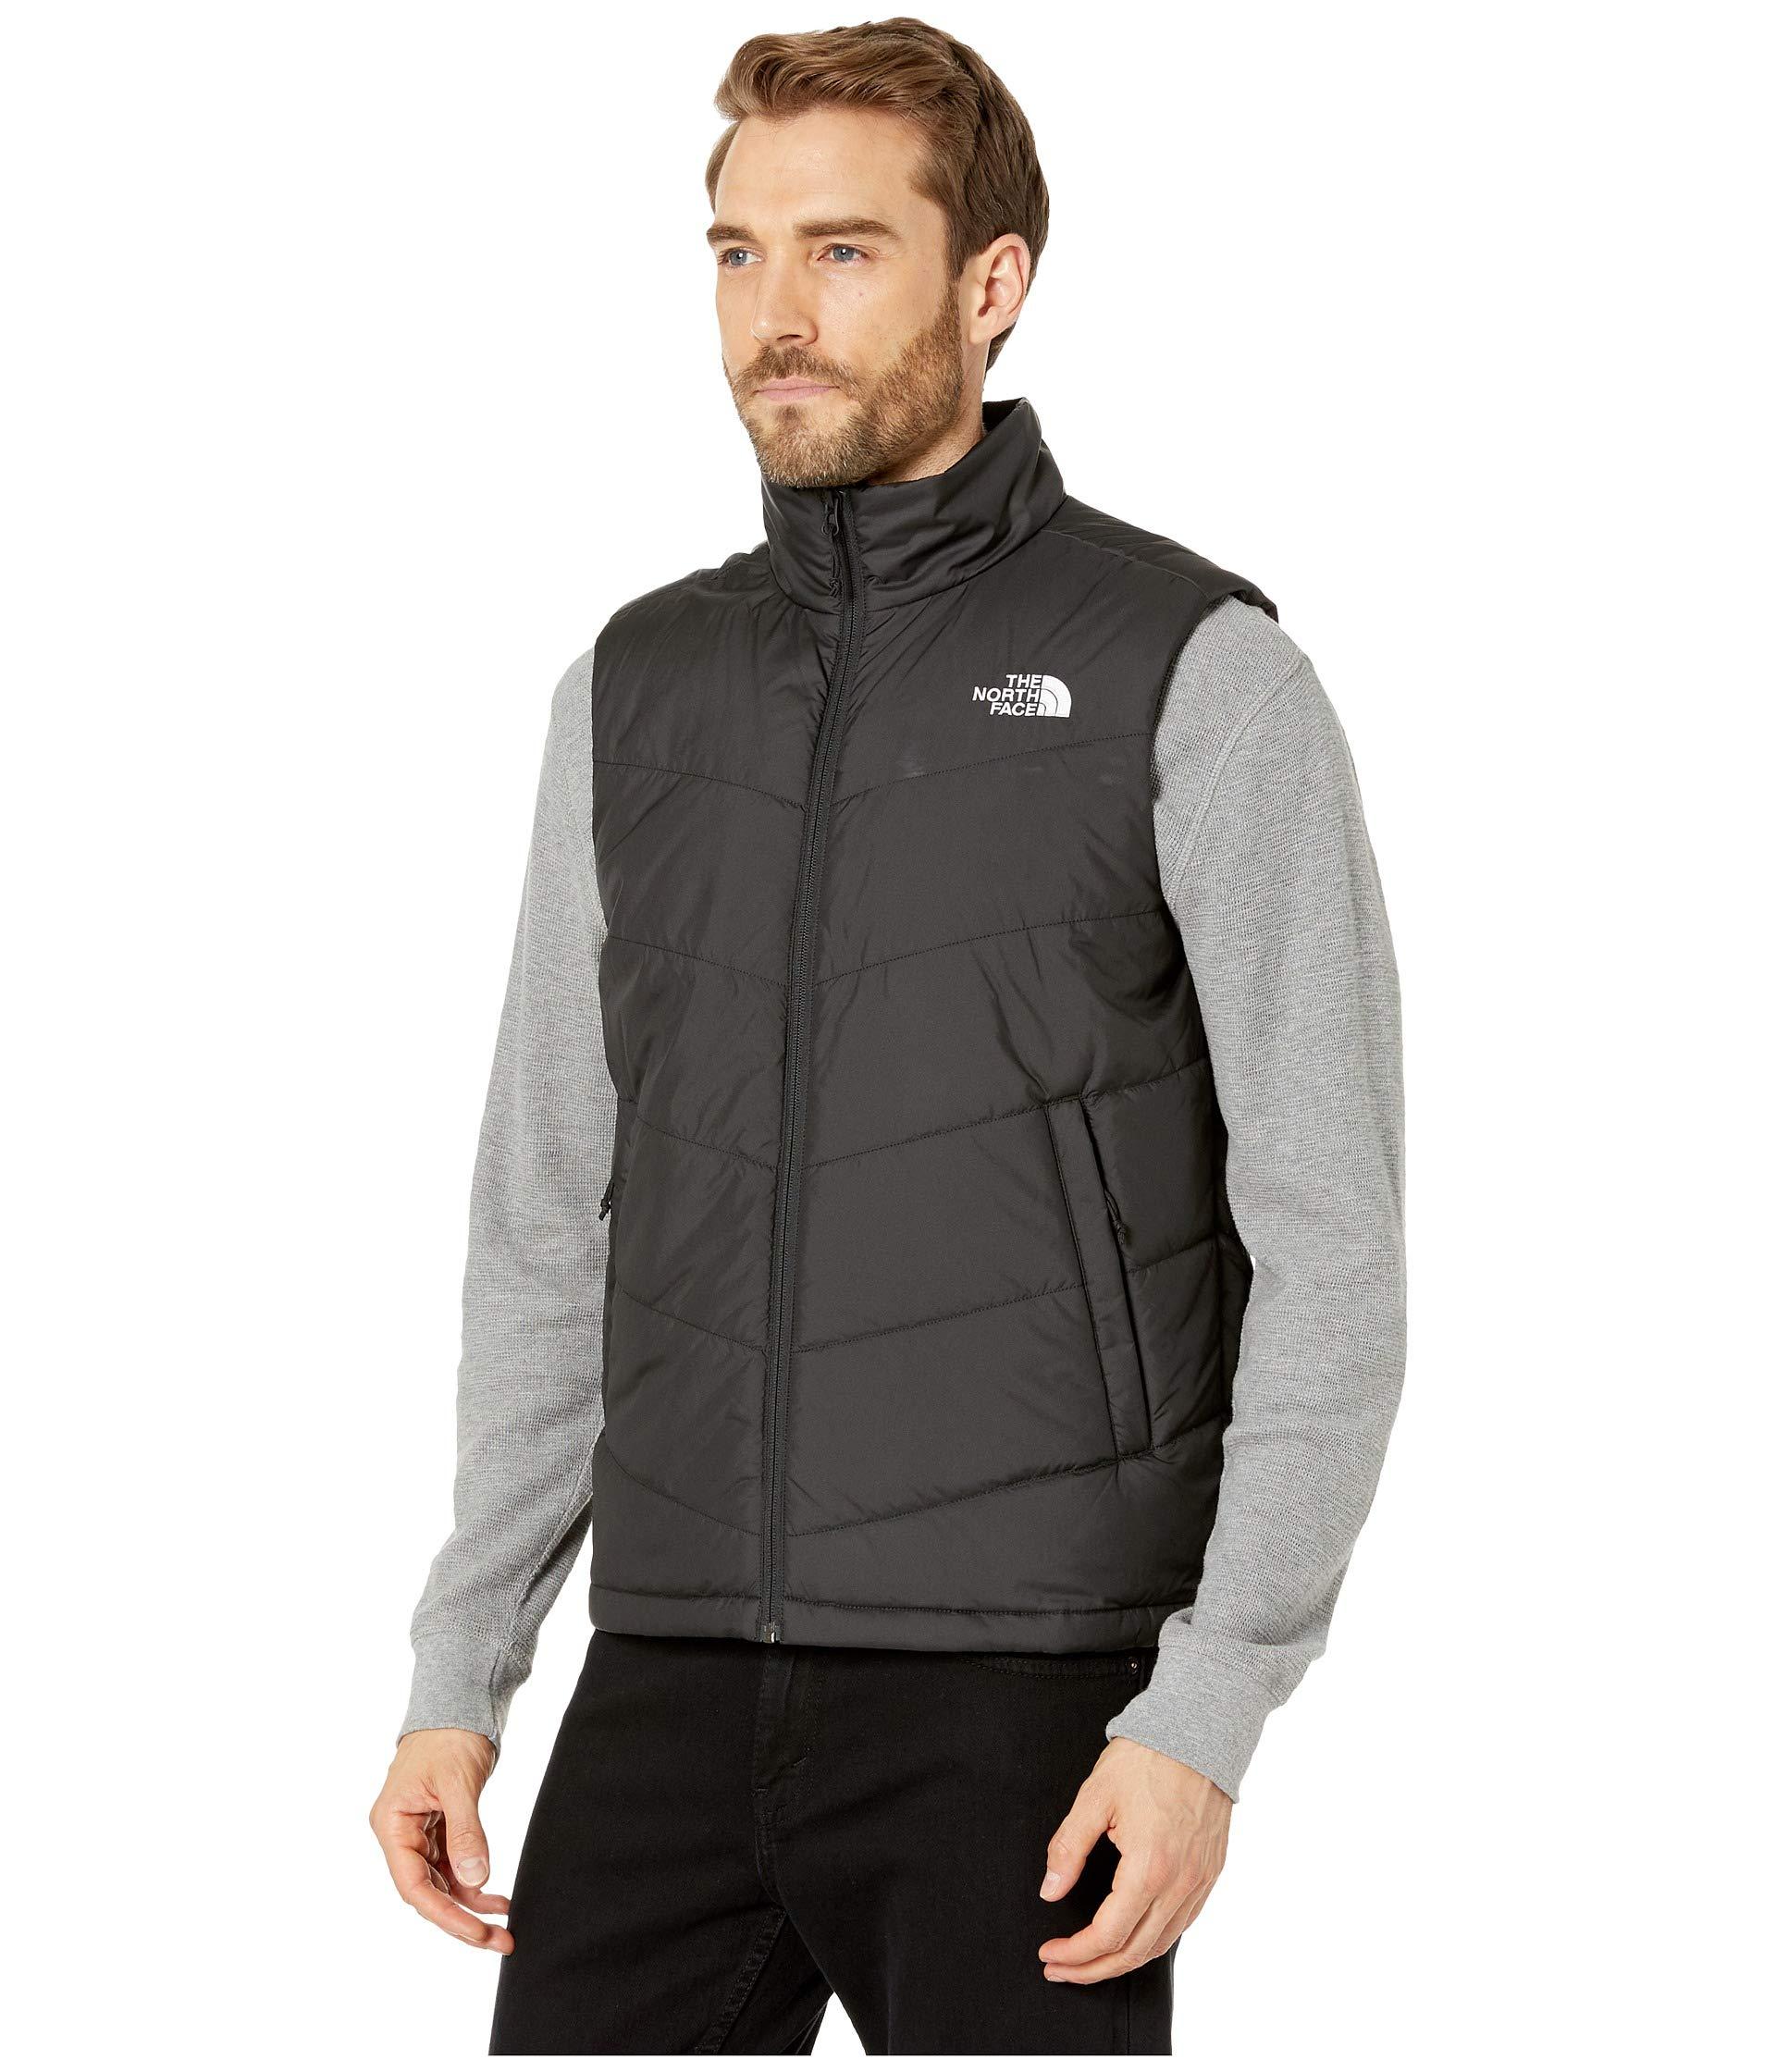 The North Face Synthetic Junction Insulated Vest in Black for Men - Lyst